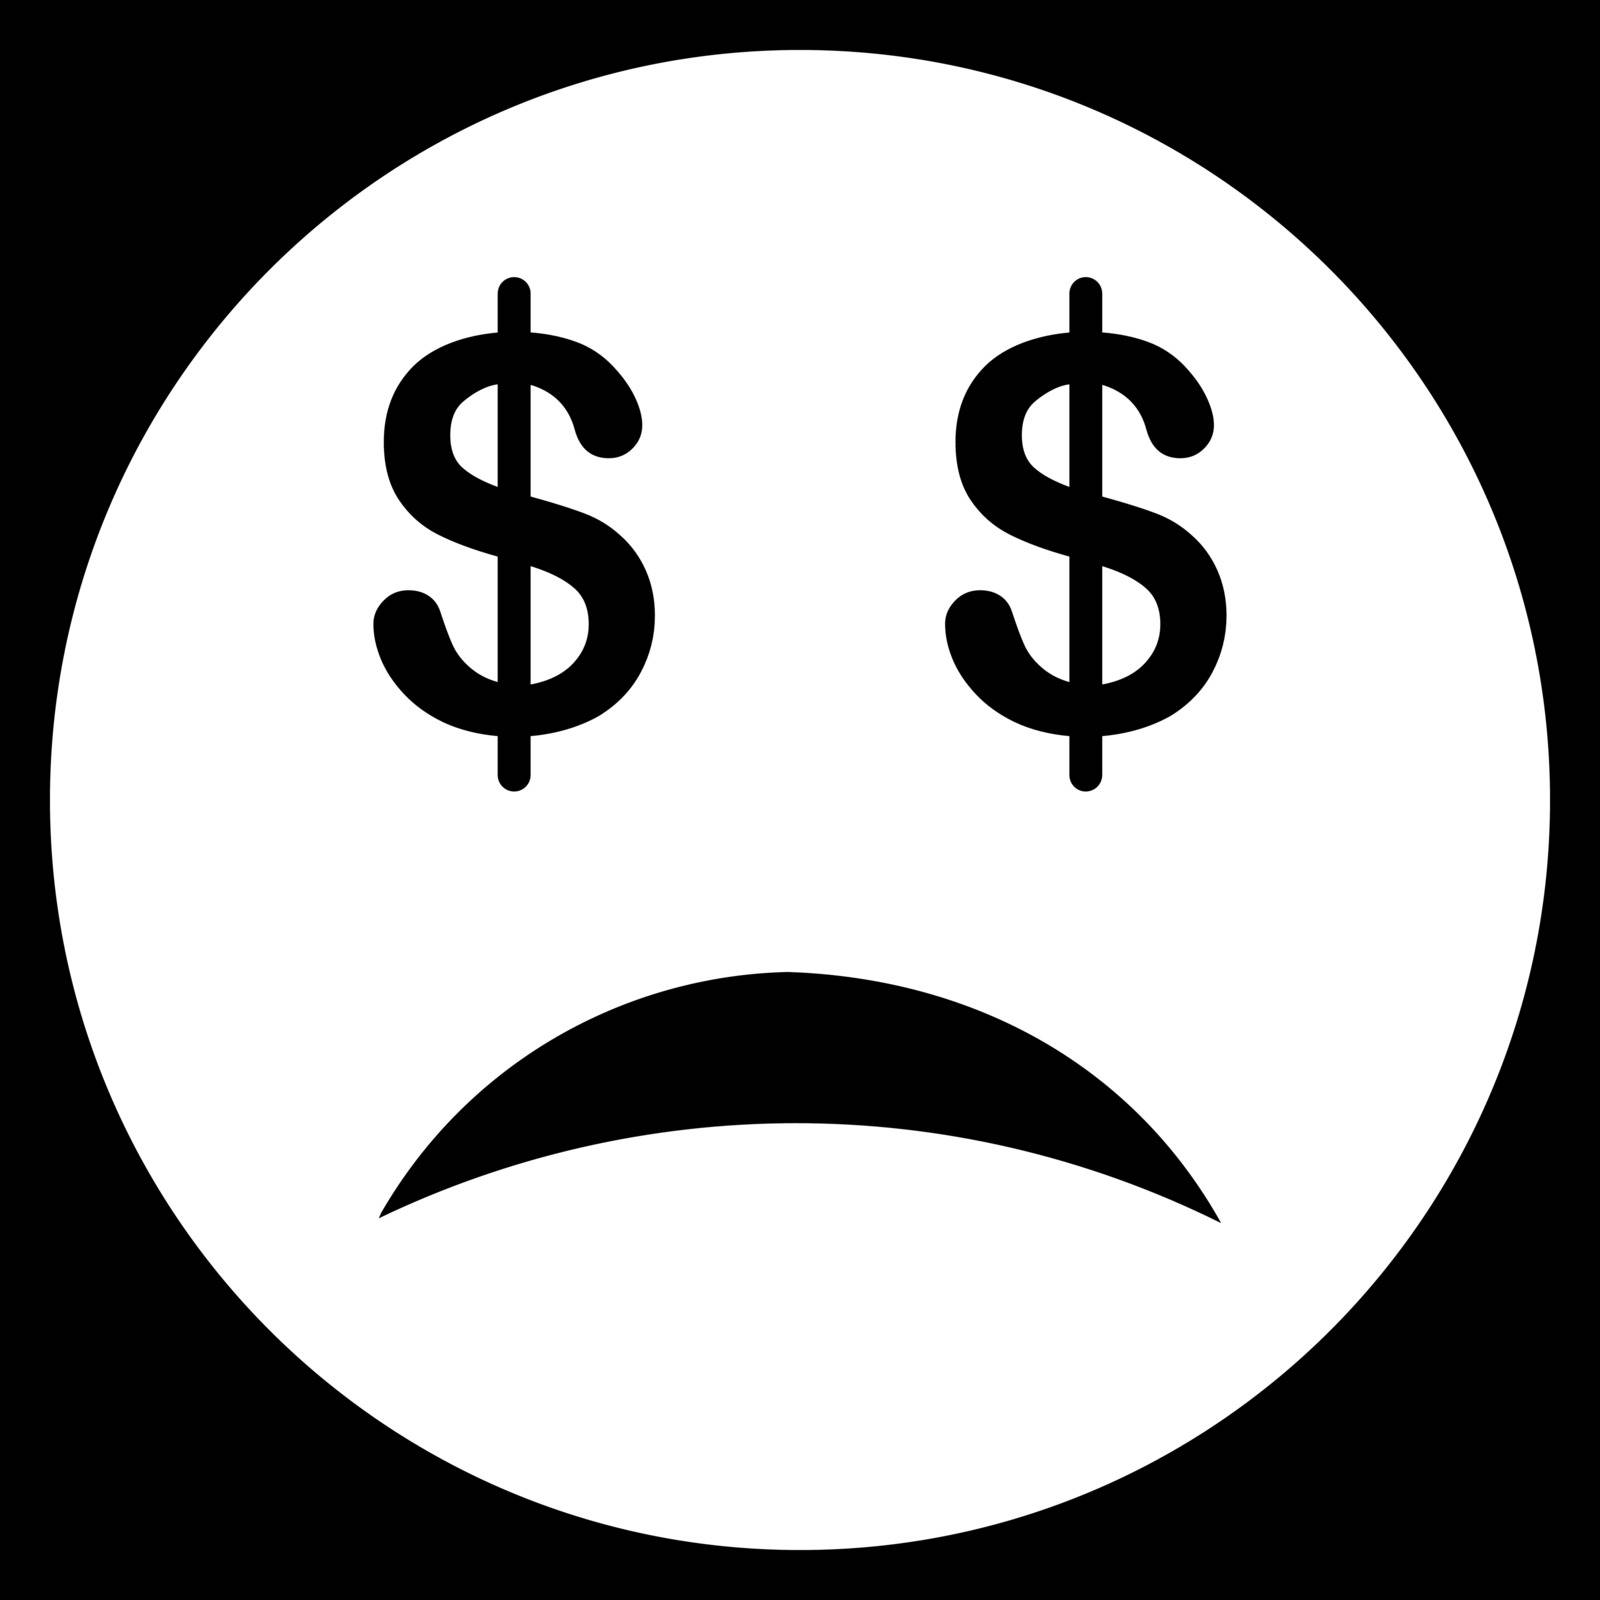 Bankrupt Smiley Icon from Commerce Set by ahasoft